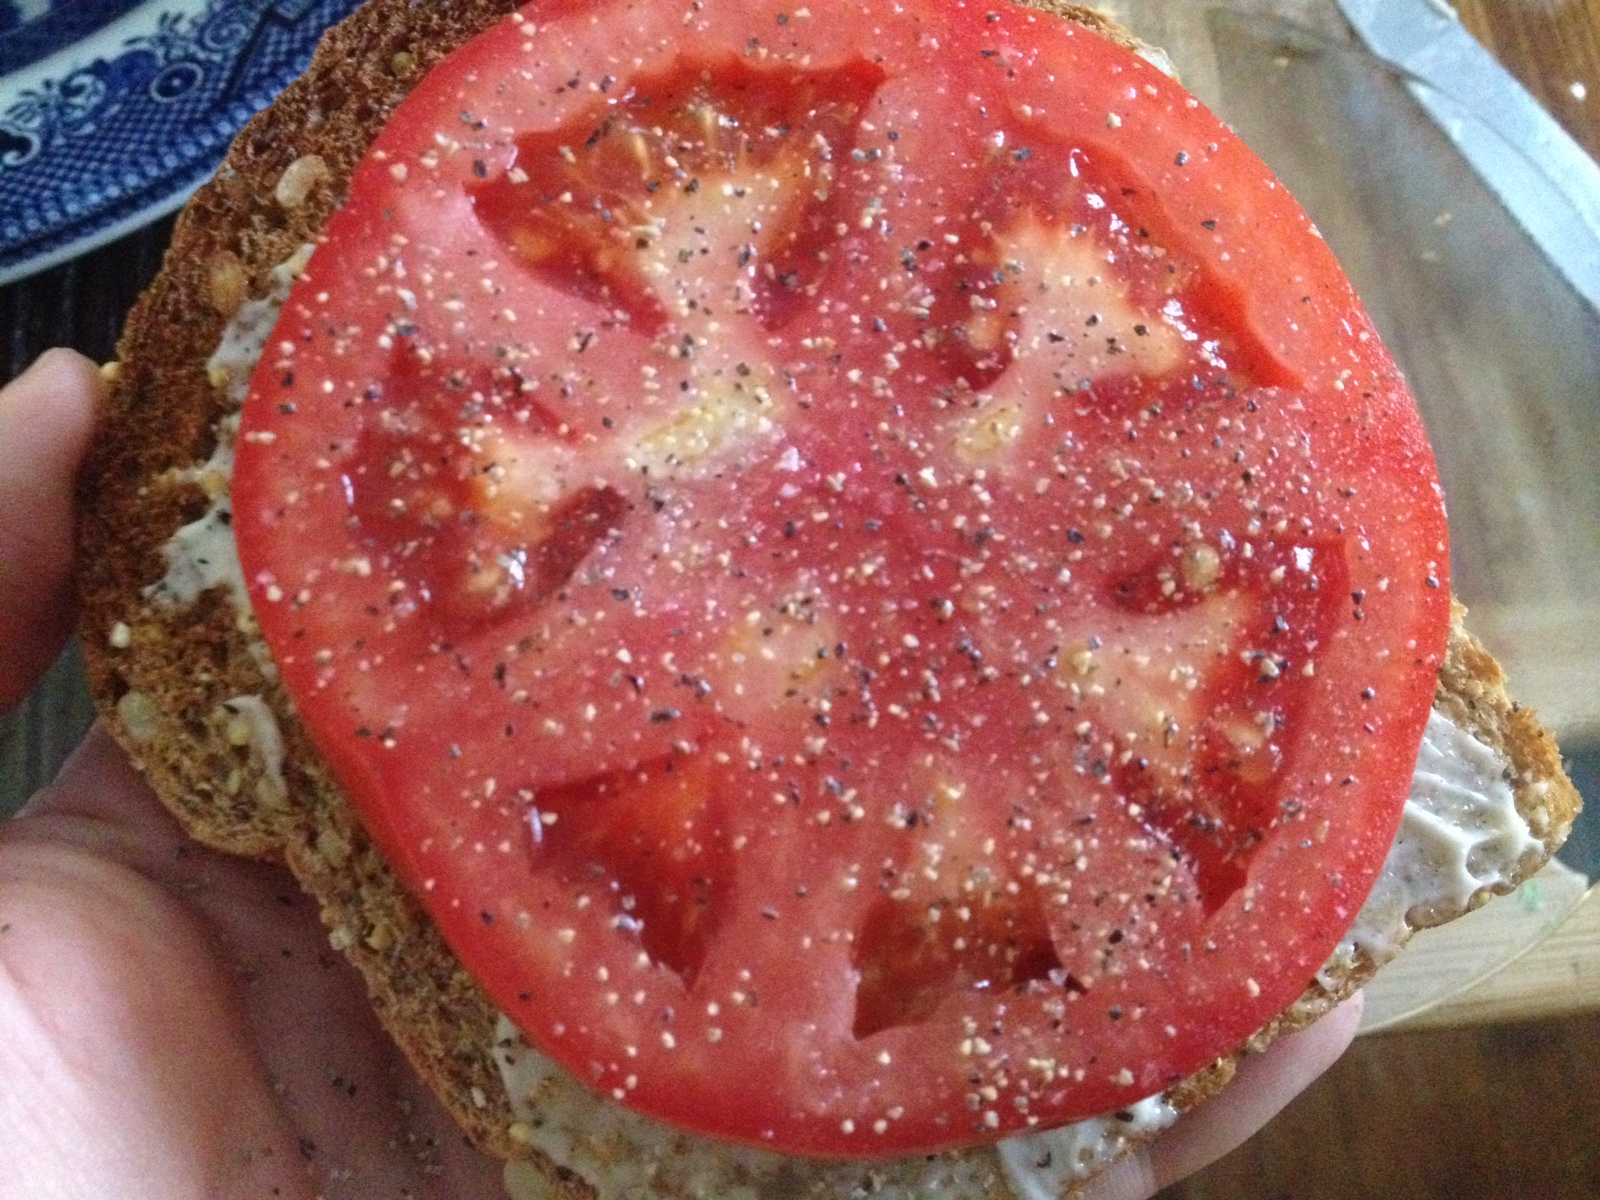 Great Harvest Bread Co. Roadside Tomato Sandwich with Blue Cheese Mayonnaise